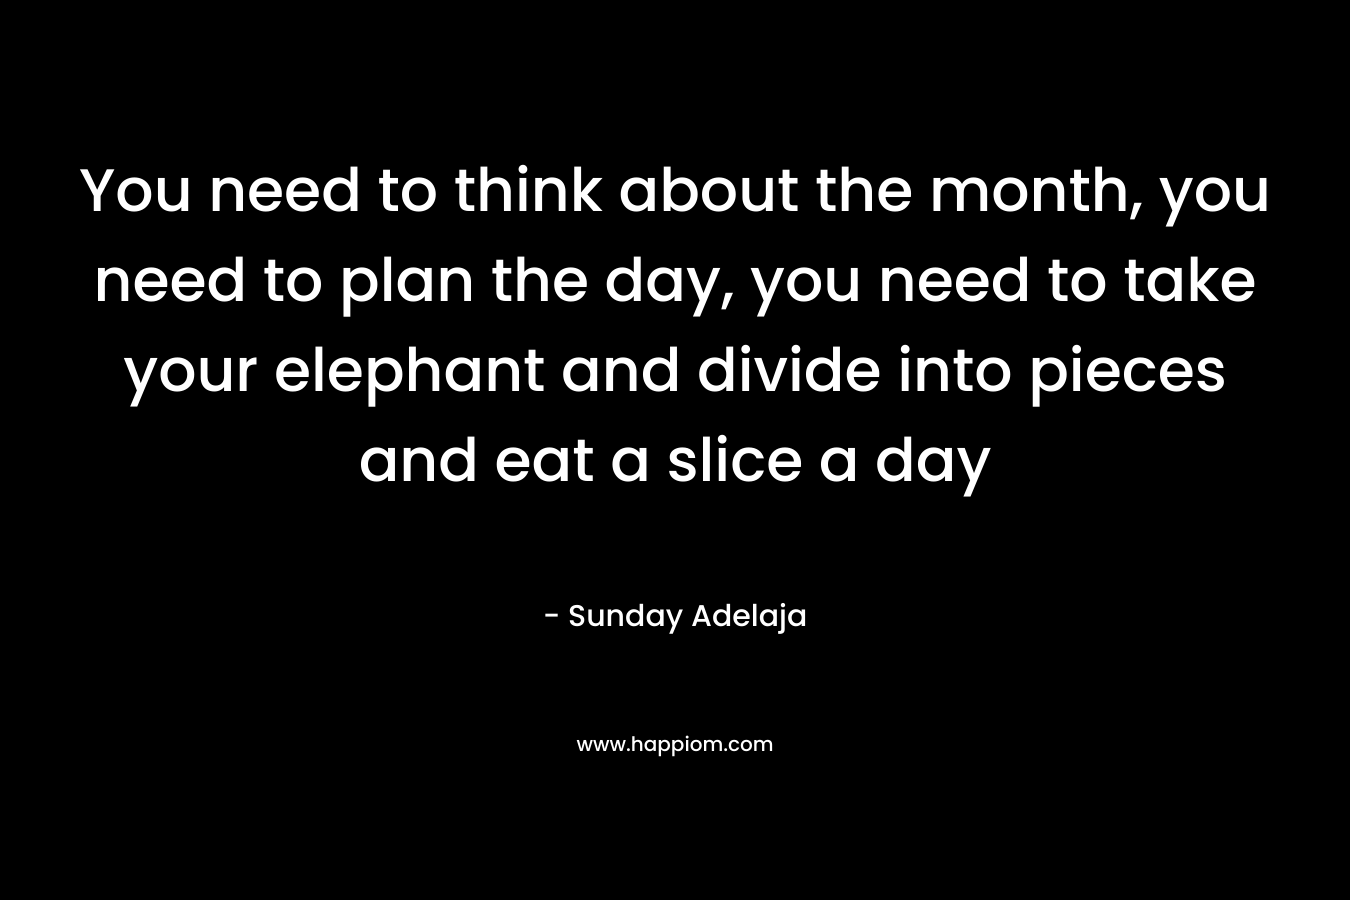 You need to think about the month, you need to plan the day, you need to take your elephant and divide into pieces and eat a slice a day